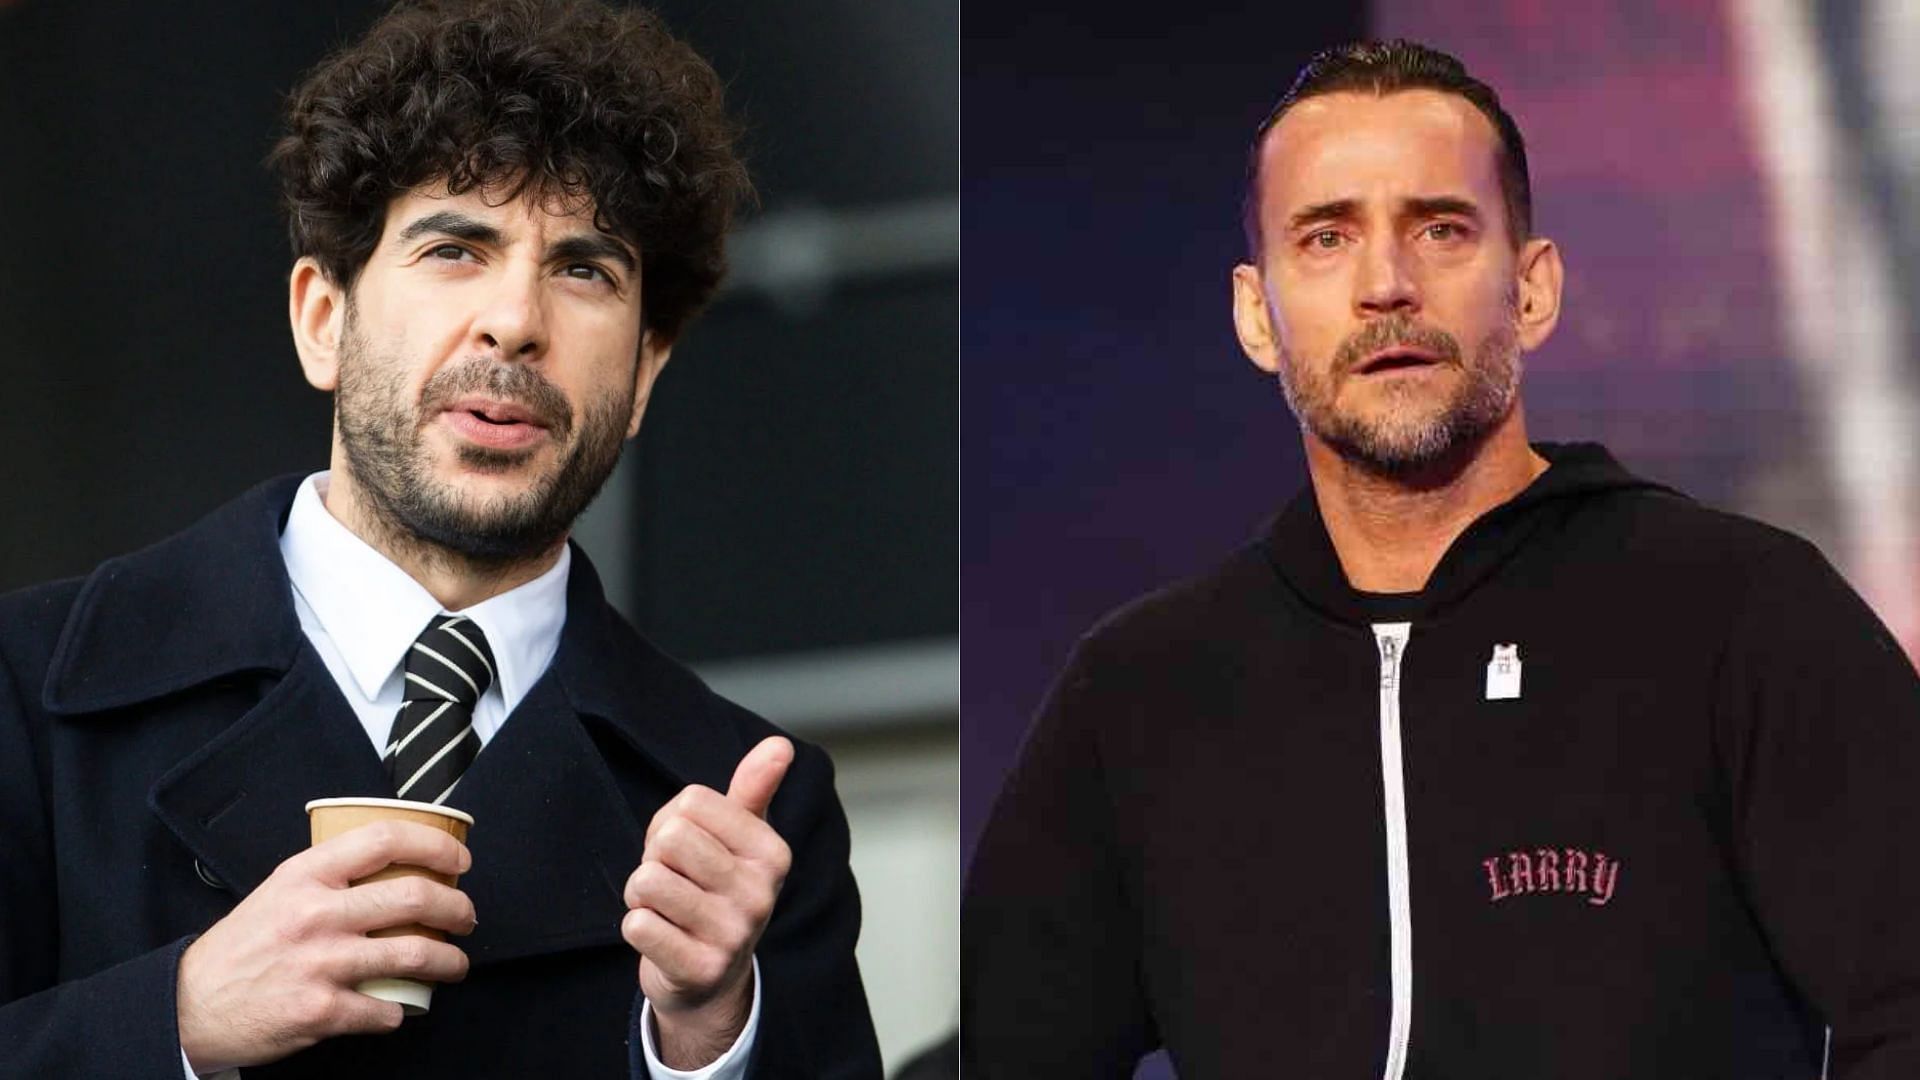 Will these AEW stars convince Tony Khan to release CM Punk?